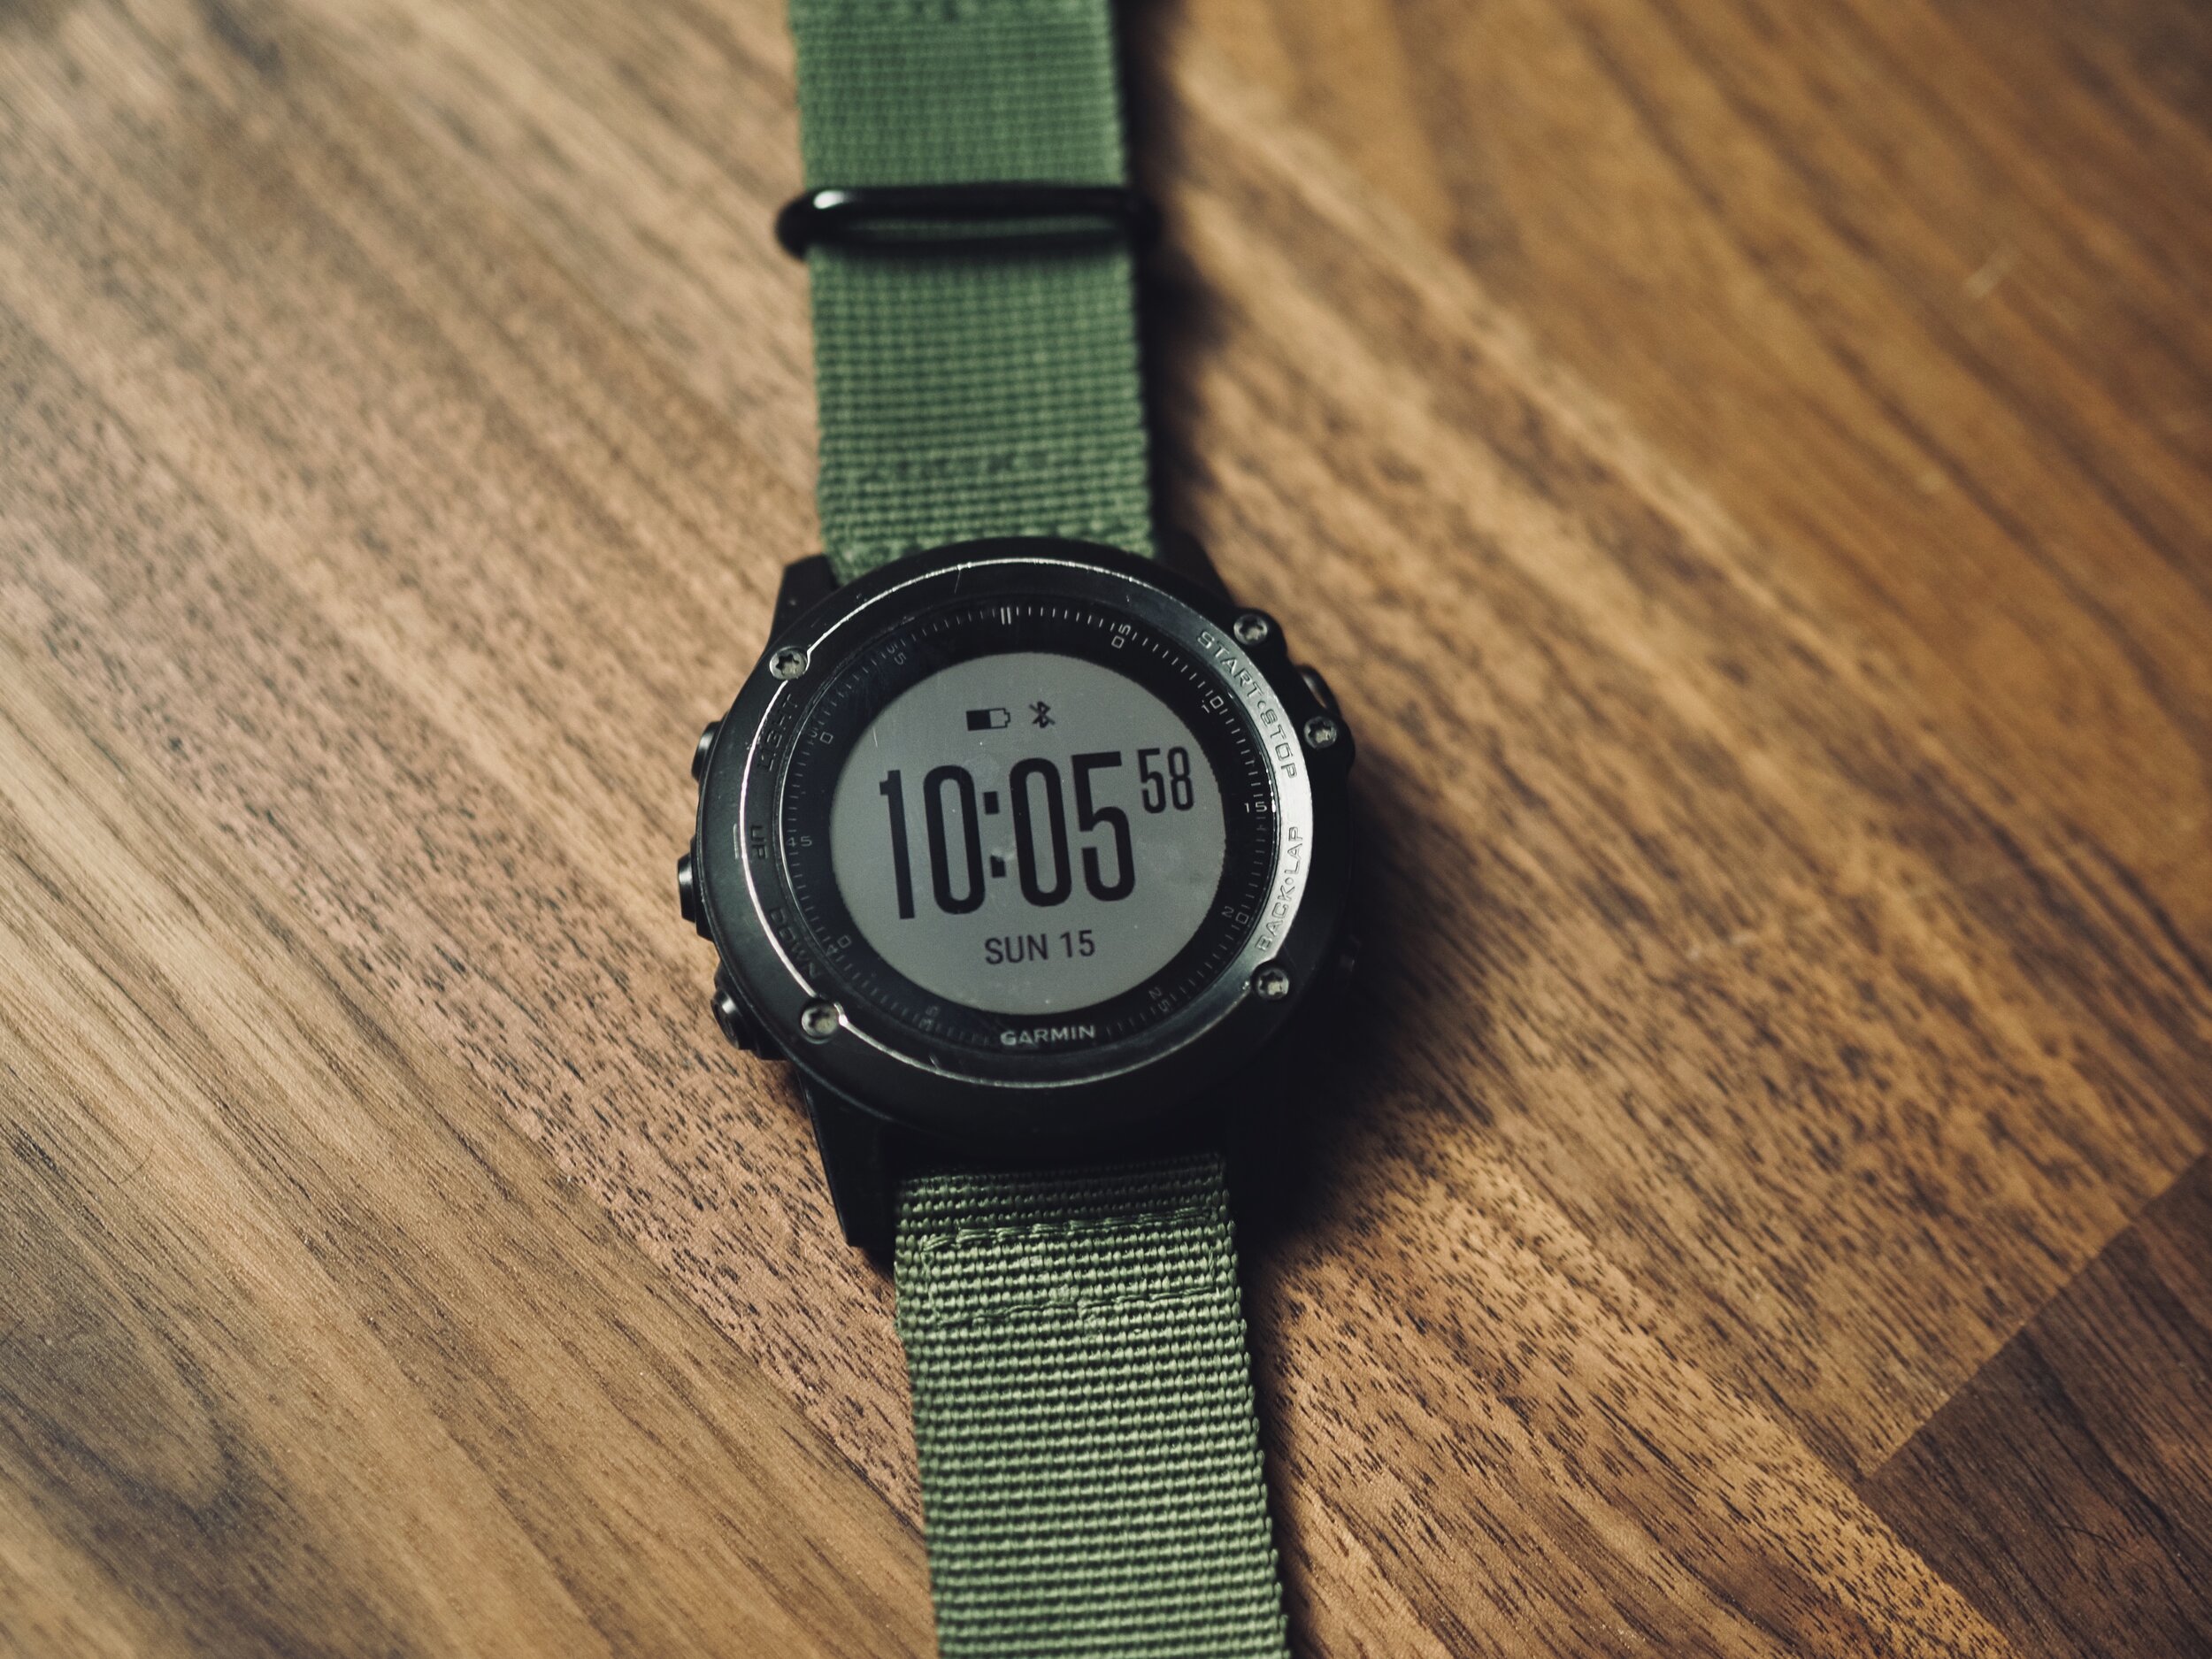 Is Garmin Watch Worth It? A VERY Term Assessment — By Land